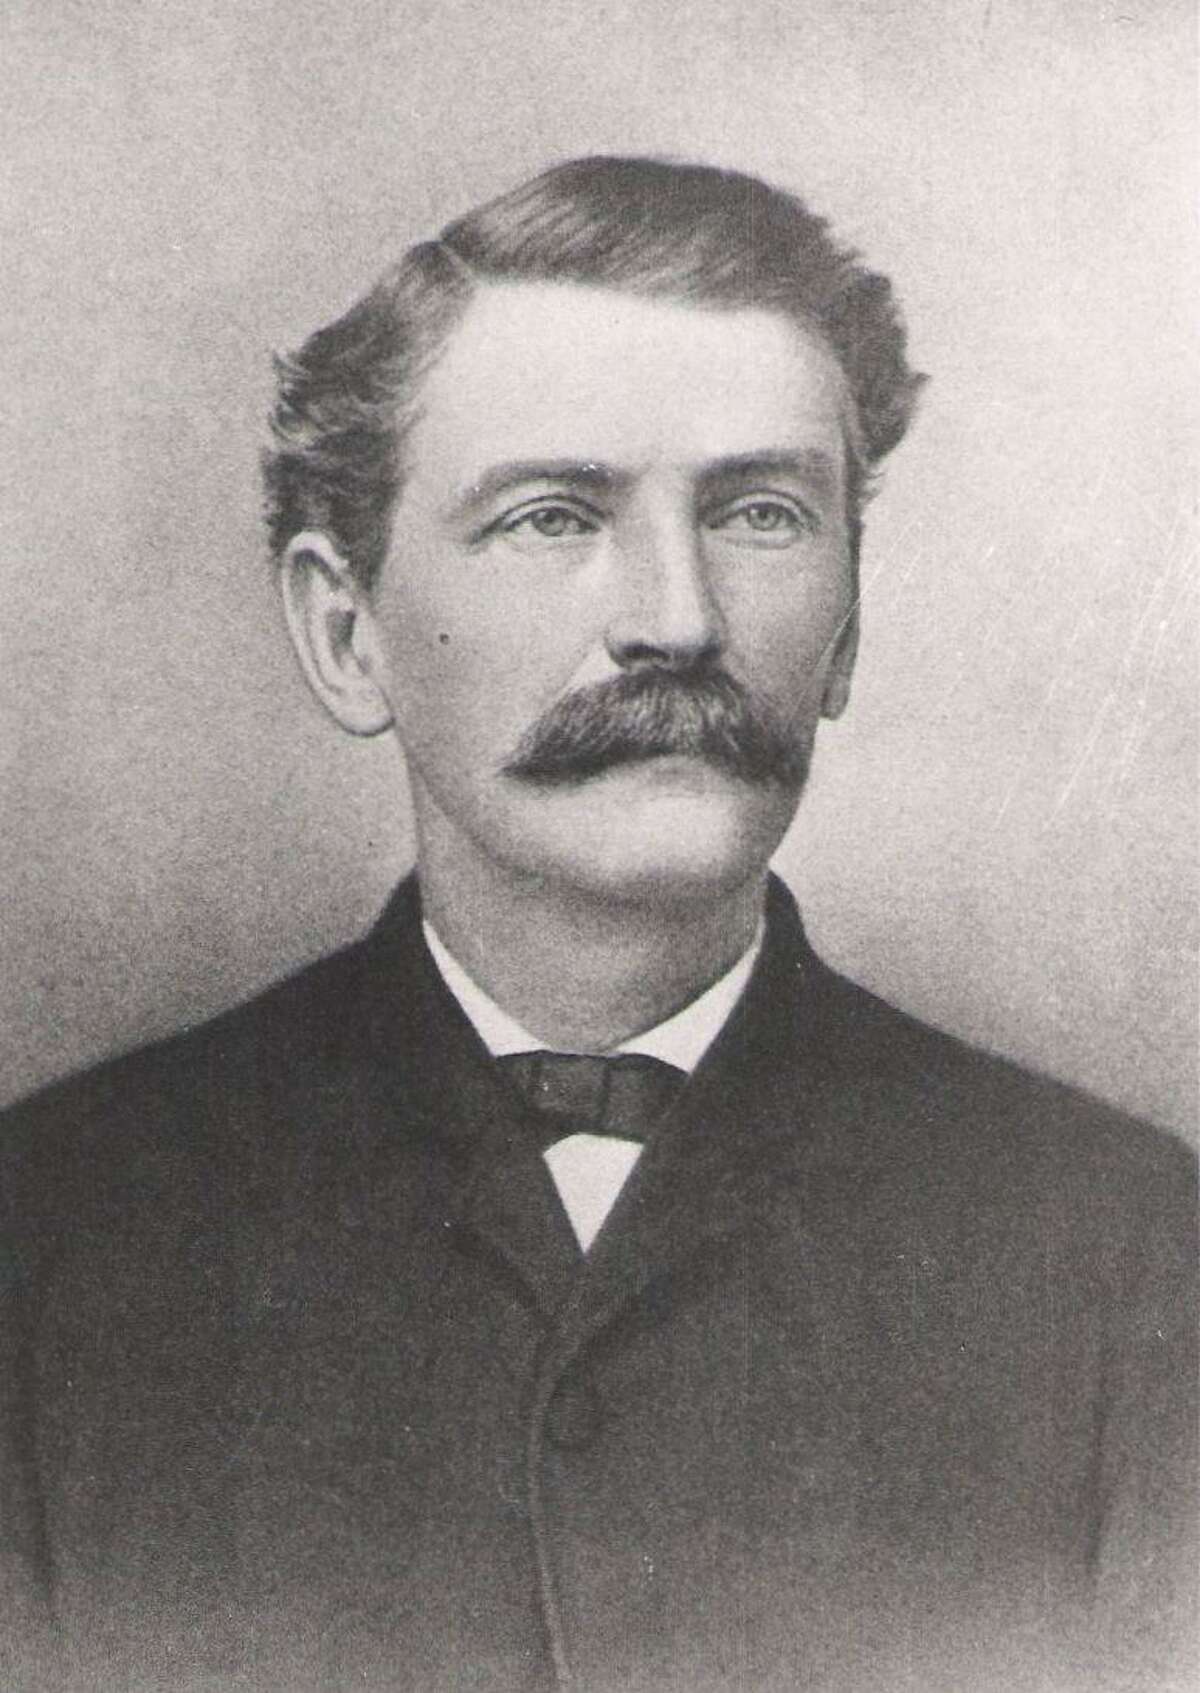 The founder of the town, Isaac Conroe. This week in 1883 Conroe became the town’s first postmaster.